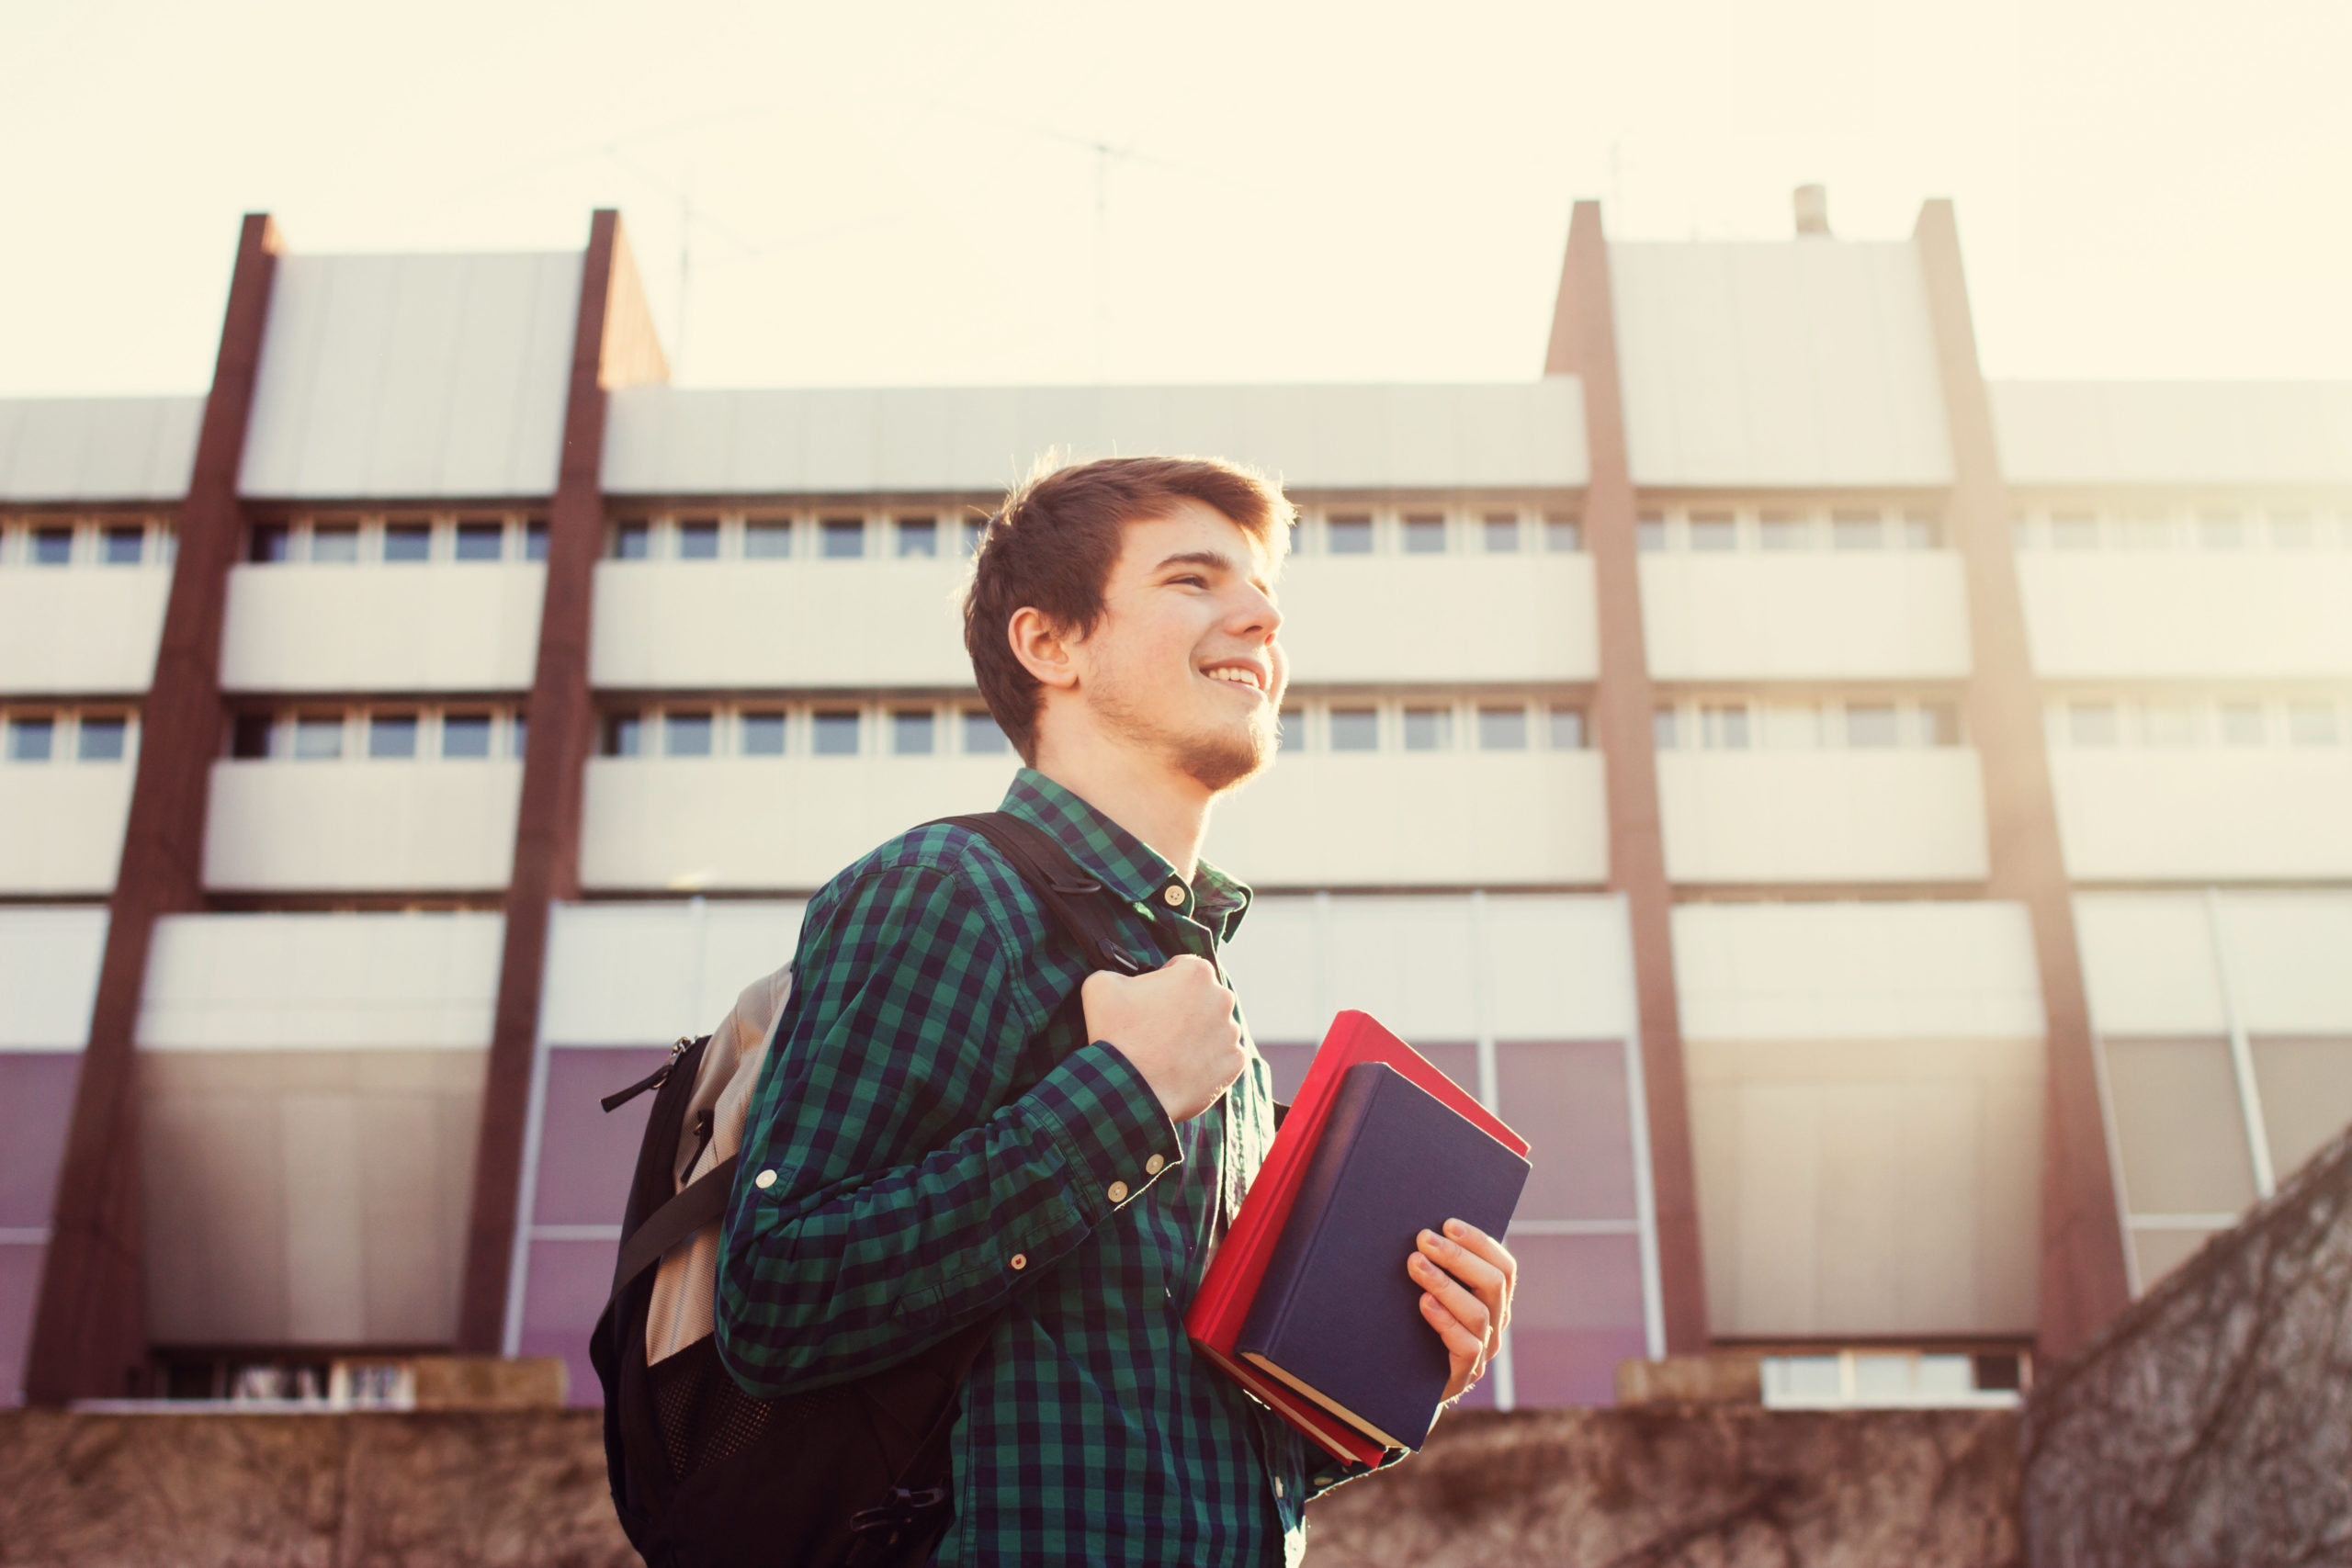 male student holding a book and a bag on a university campus